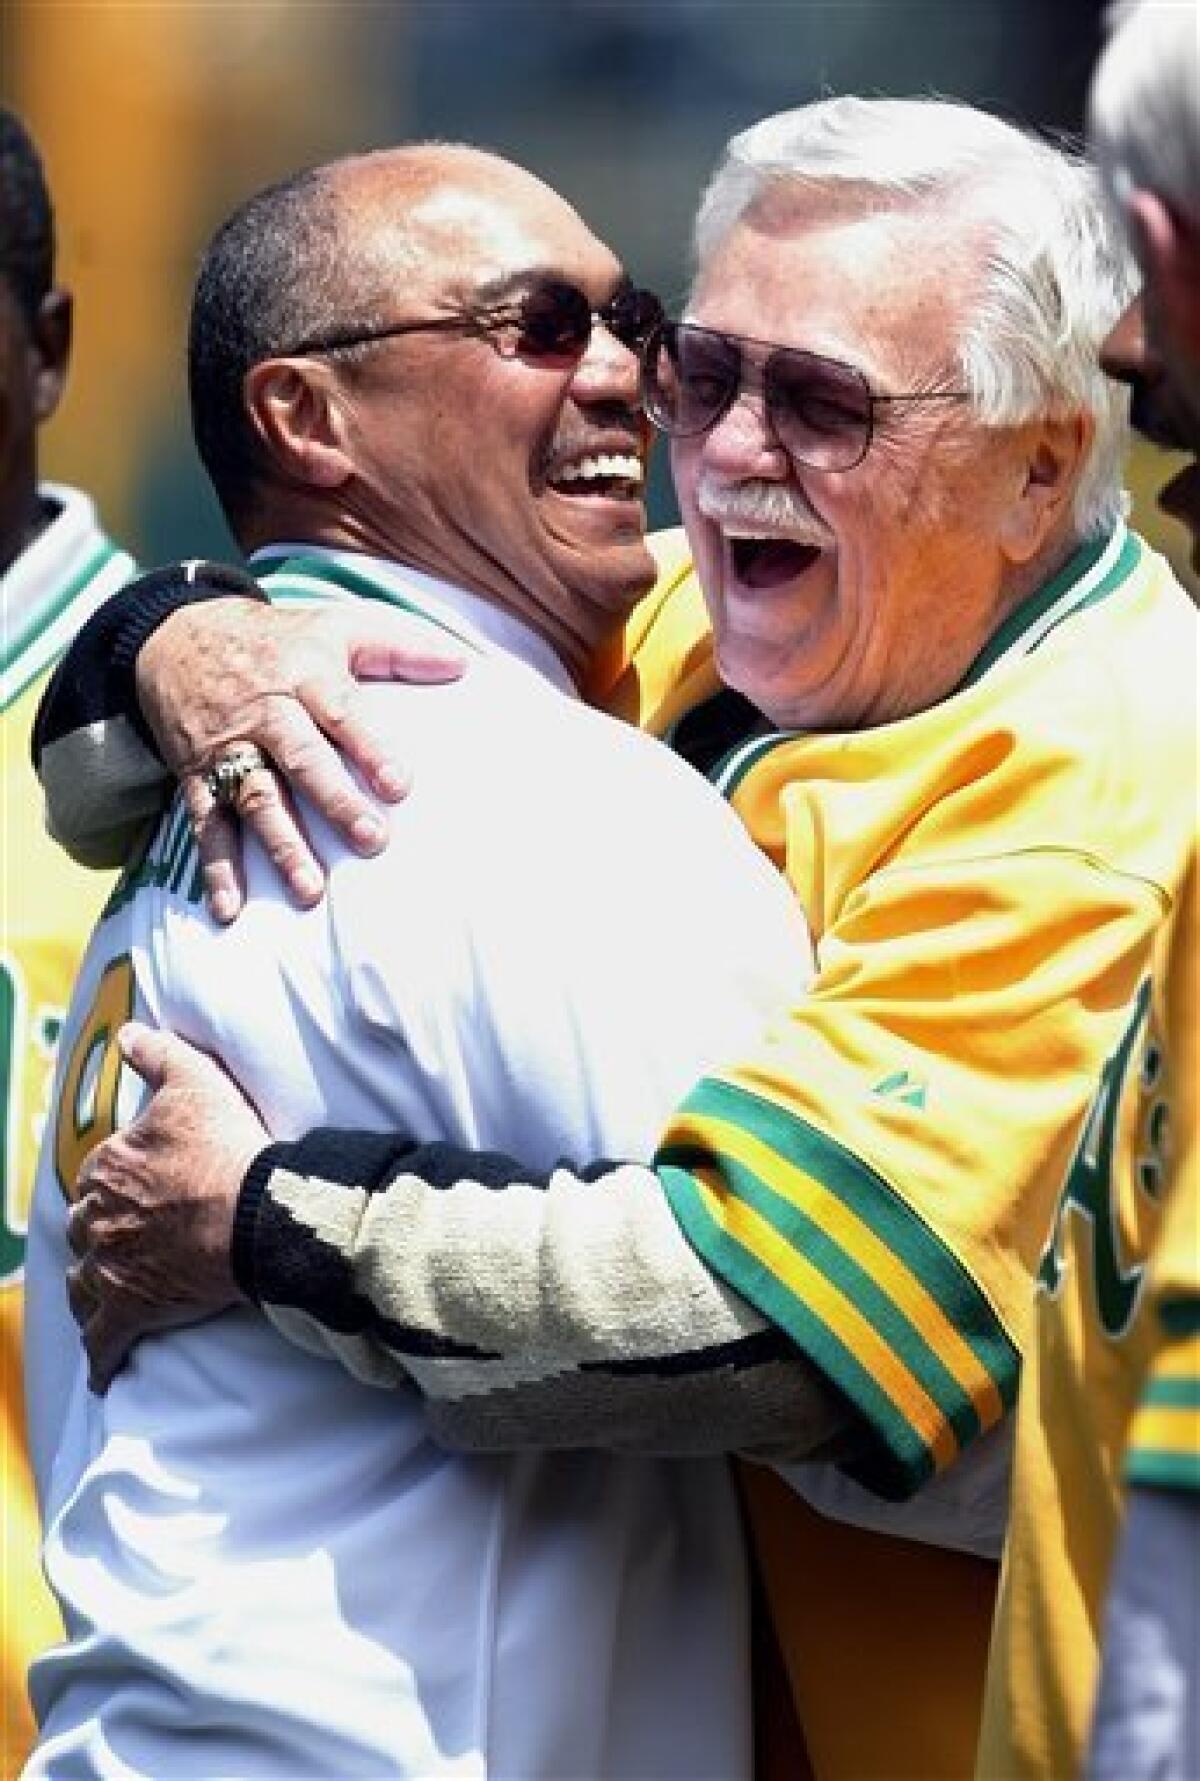 Hall of Famer Reggie Jackson: A's 1970s dynasty was way better